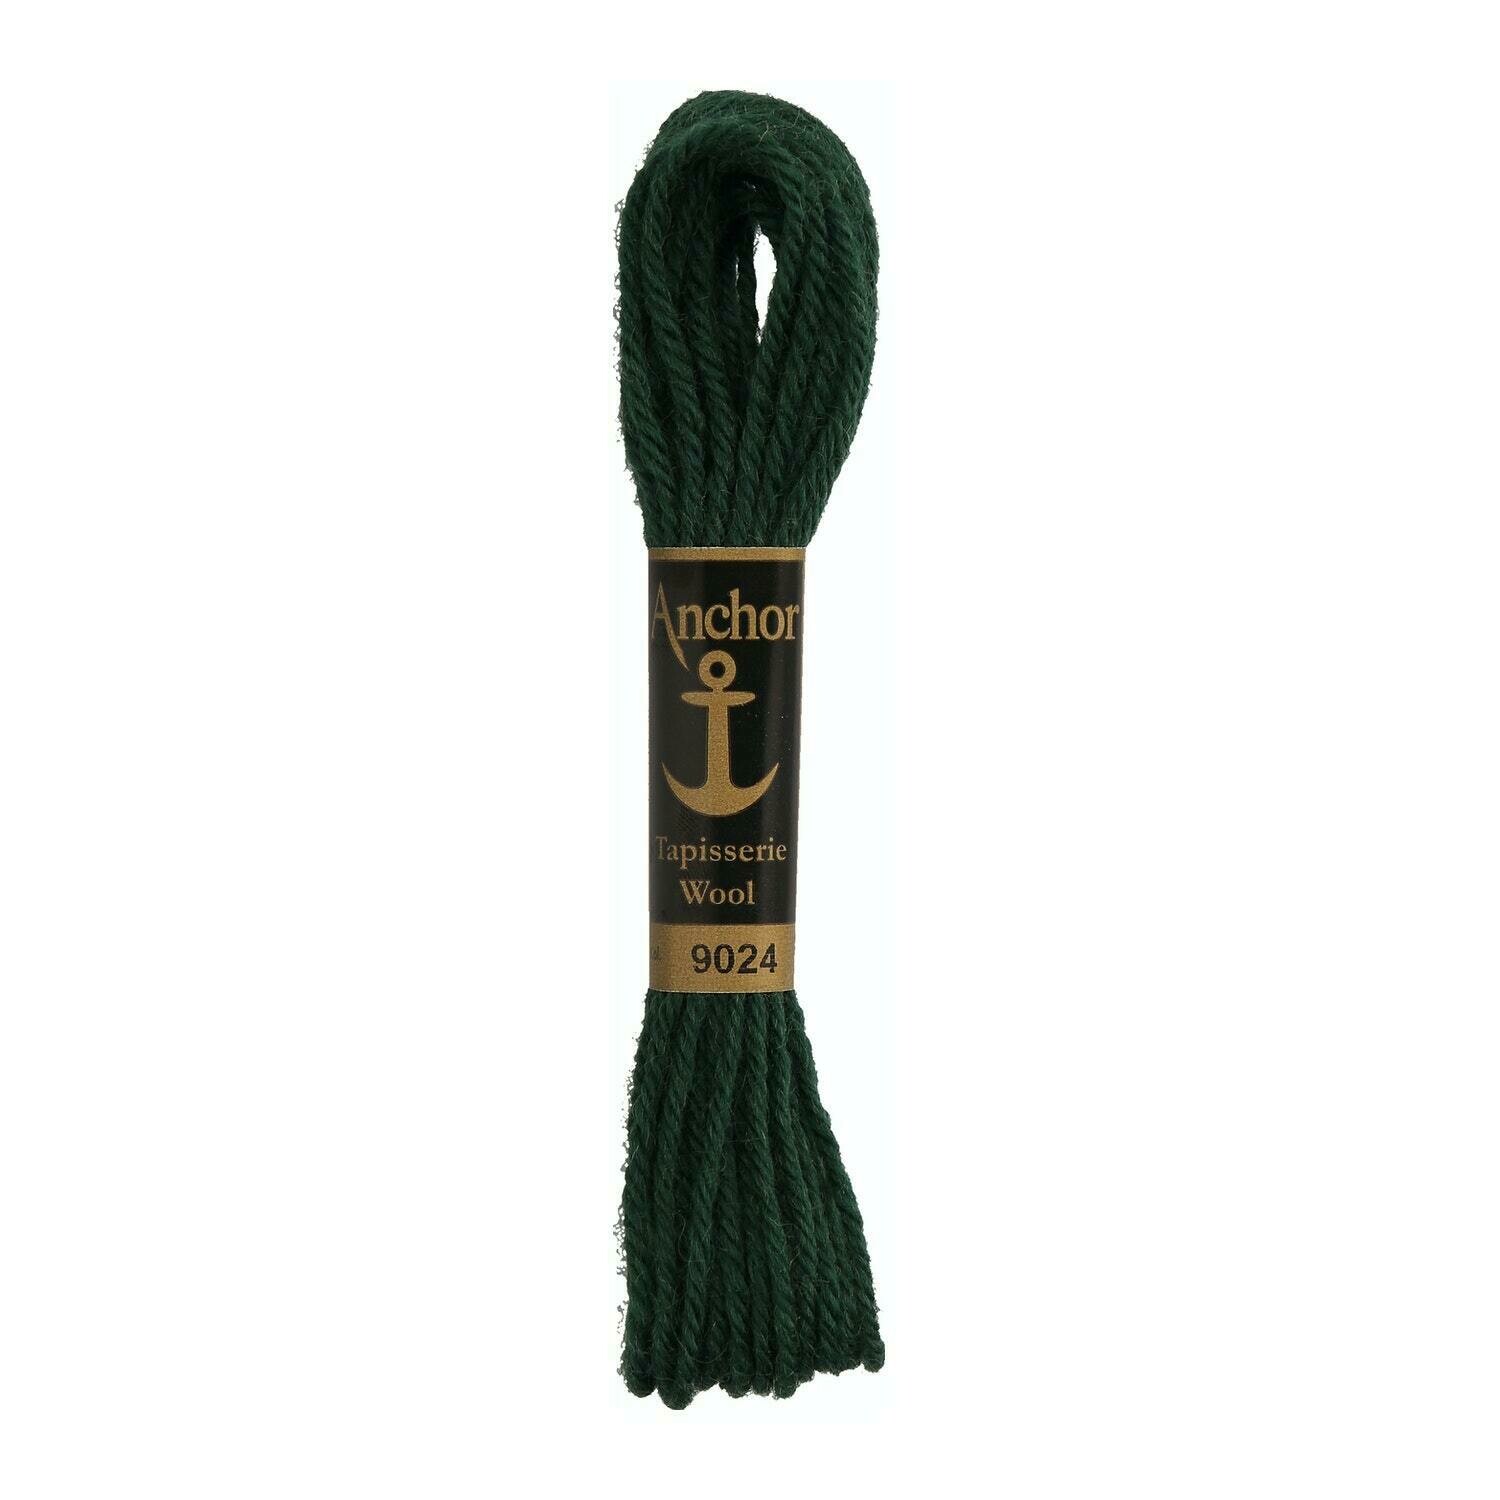 Anchor Tapisserie Wool #09024